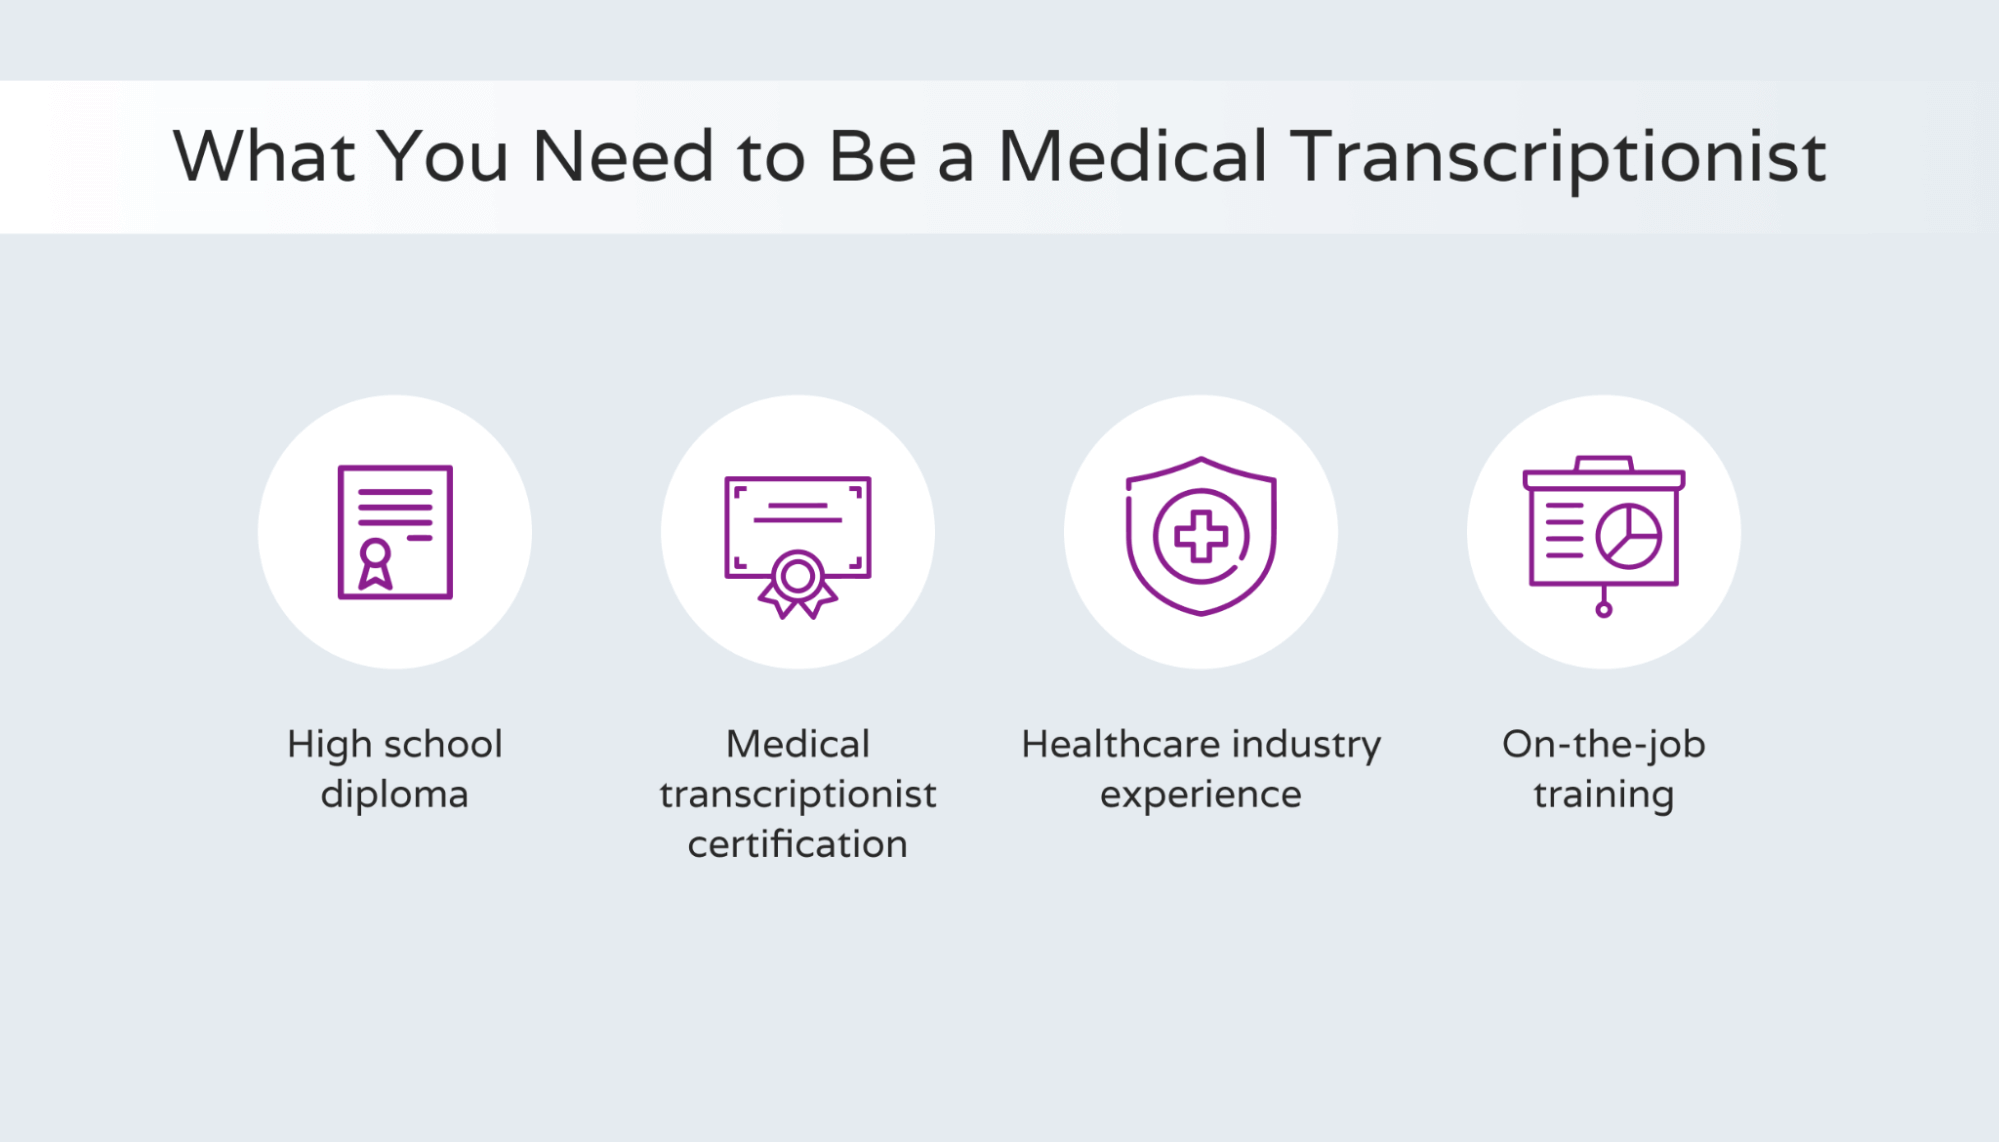 What do you need to be a medical transcriptionist